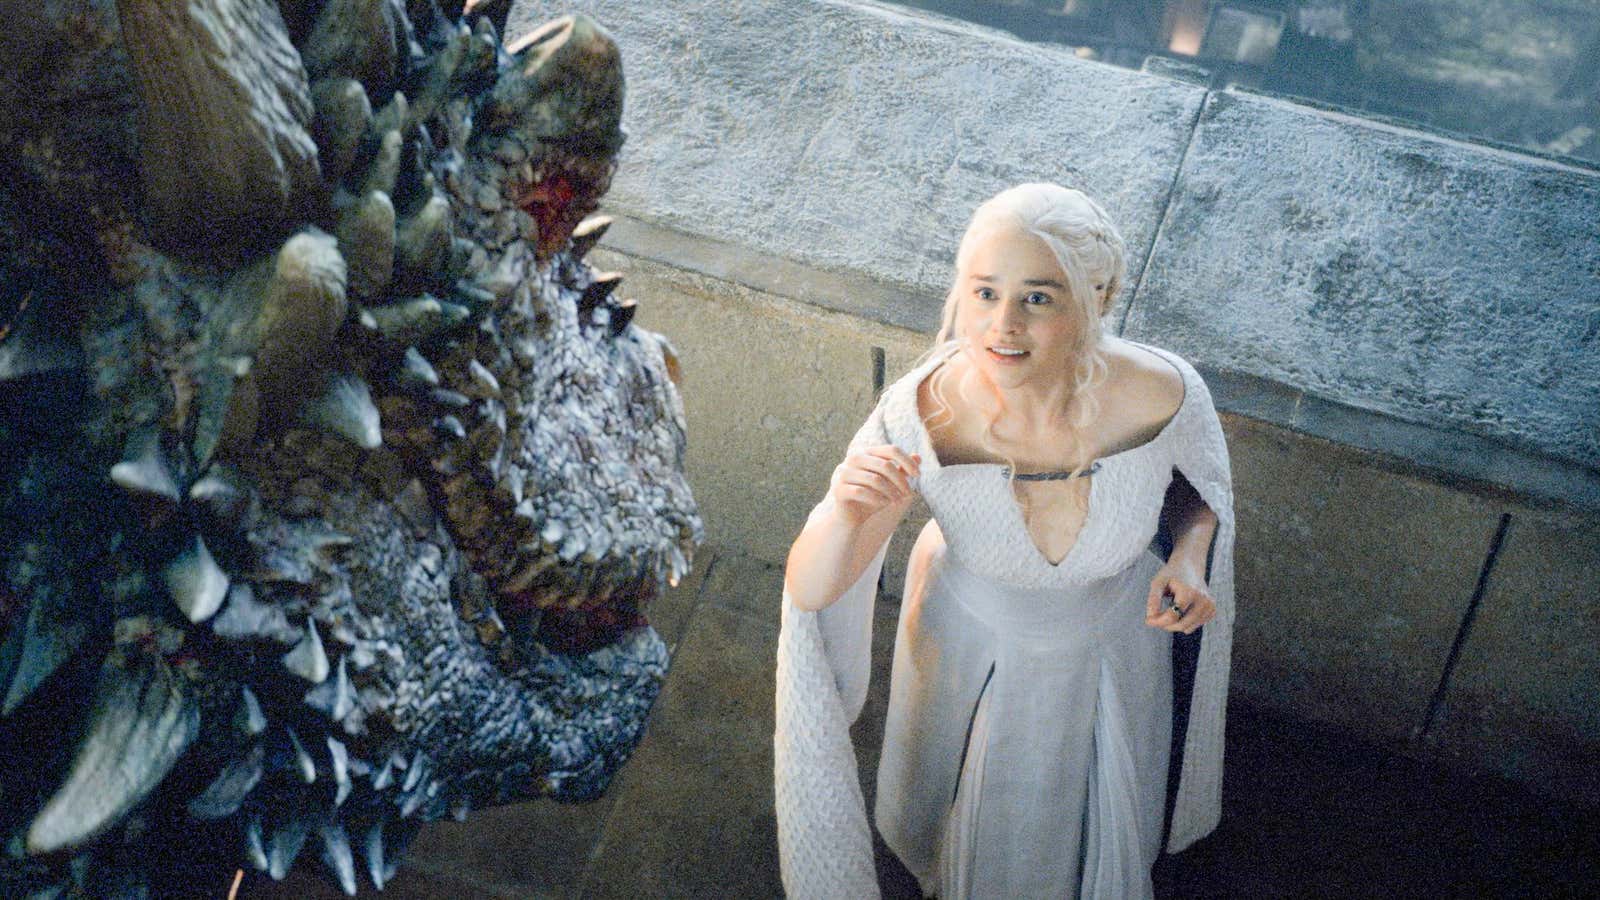 Daenerys’ encounter with her dragons didn’t go quite as well during the season premiere of “Game of Thrones.”